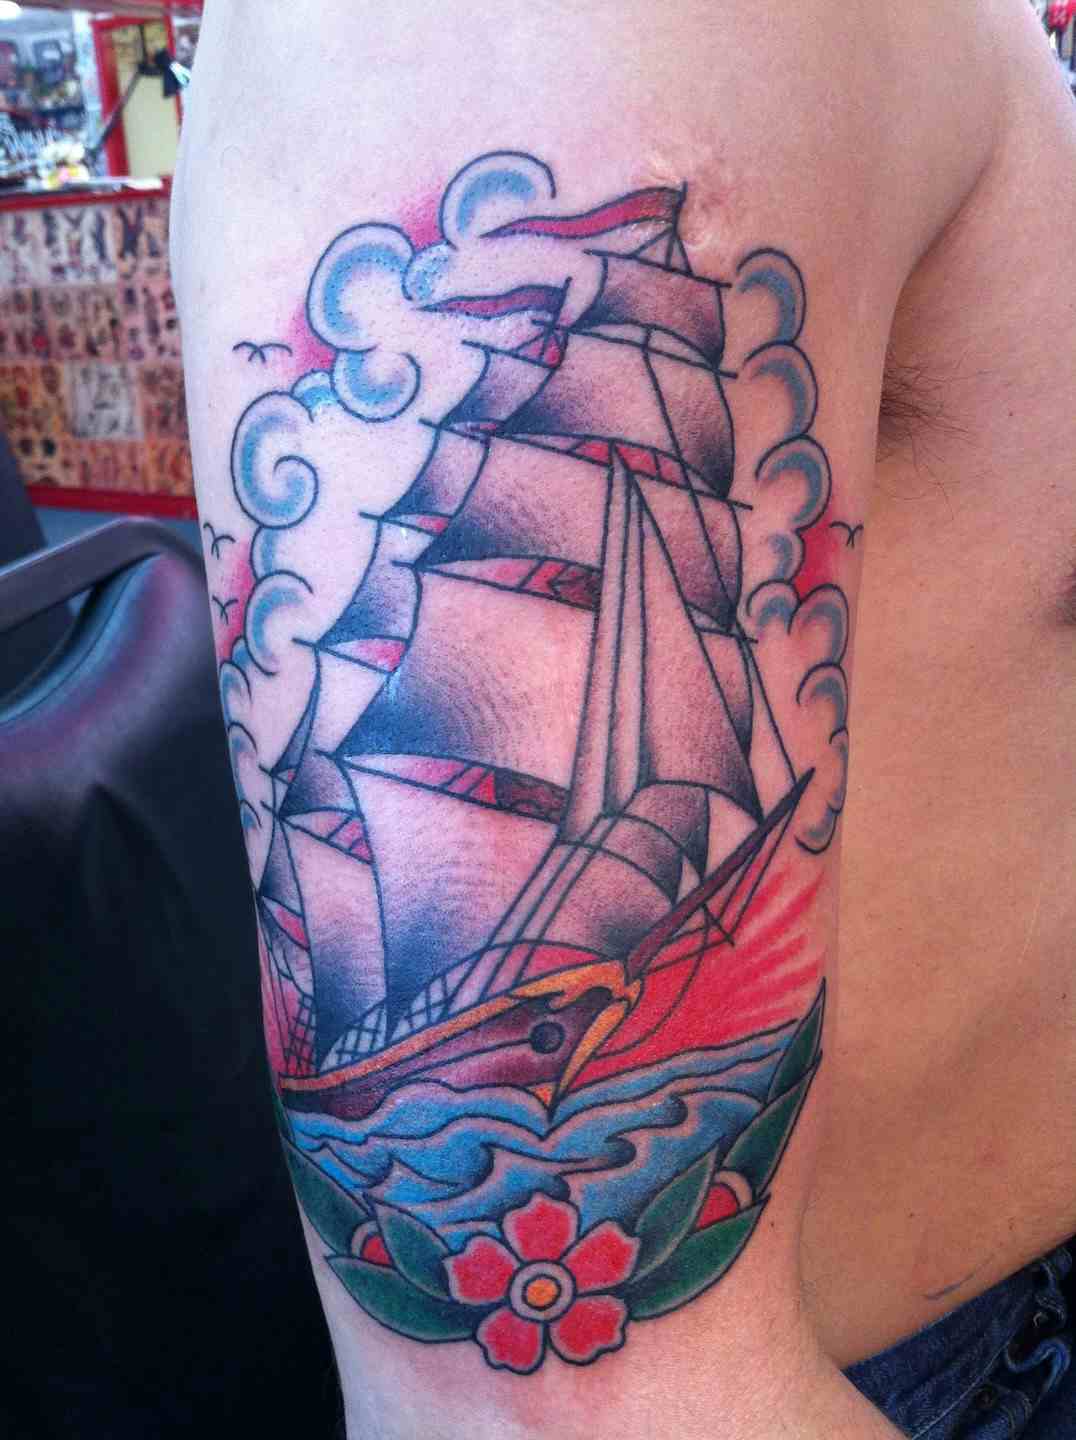 Ship with flowers tattoo